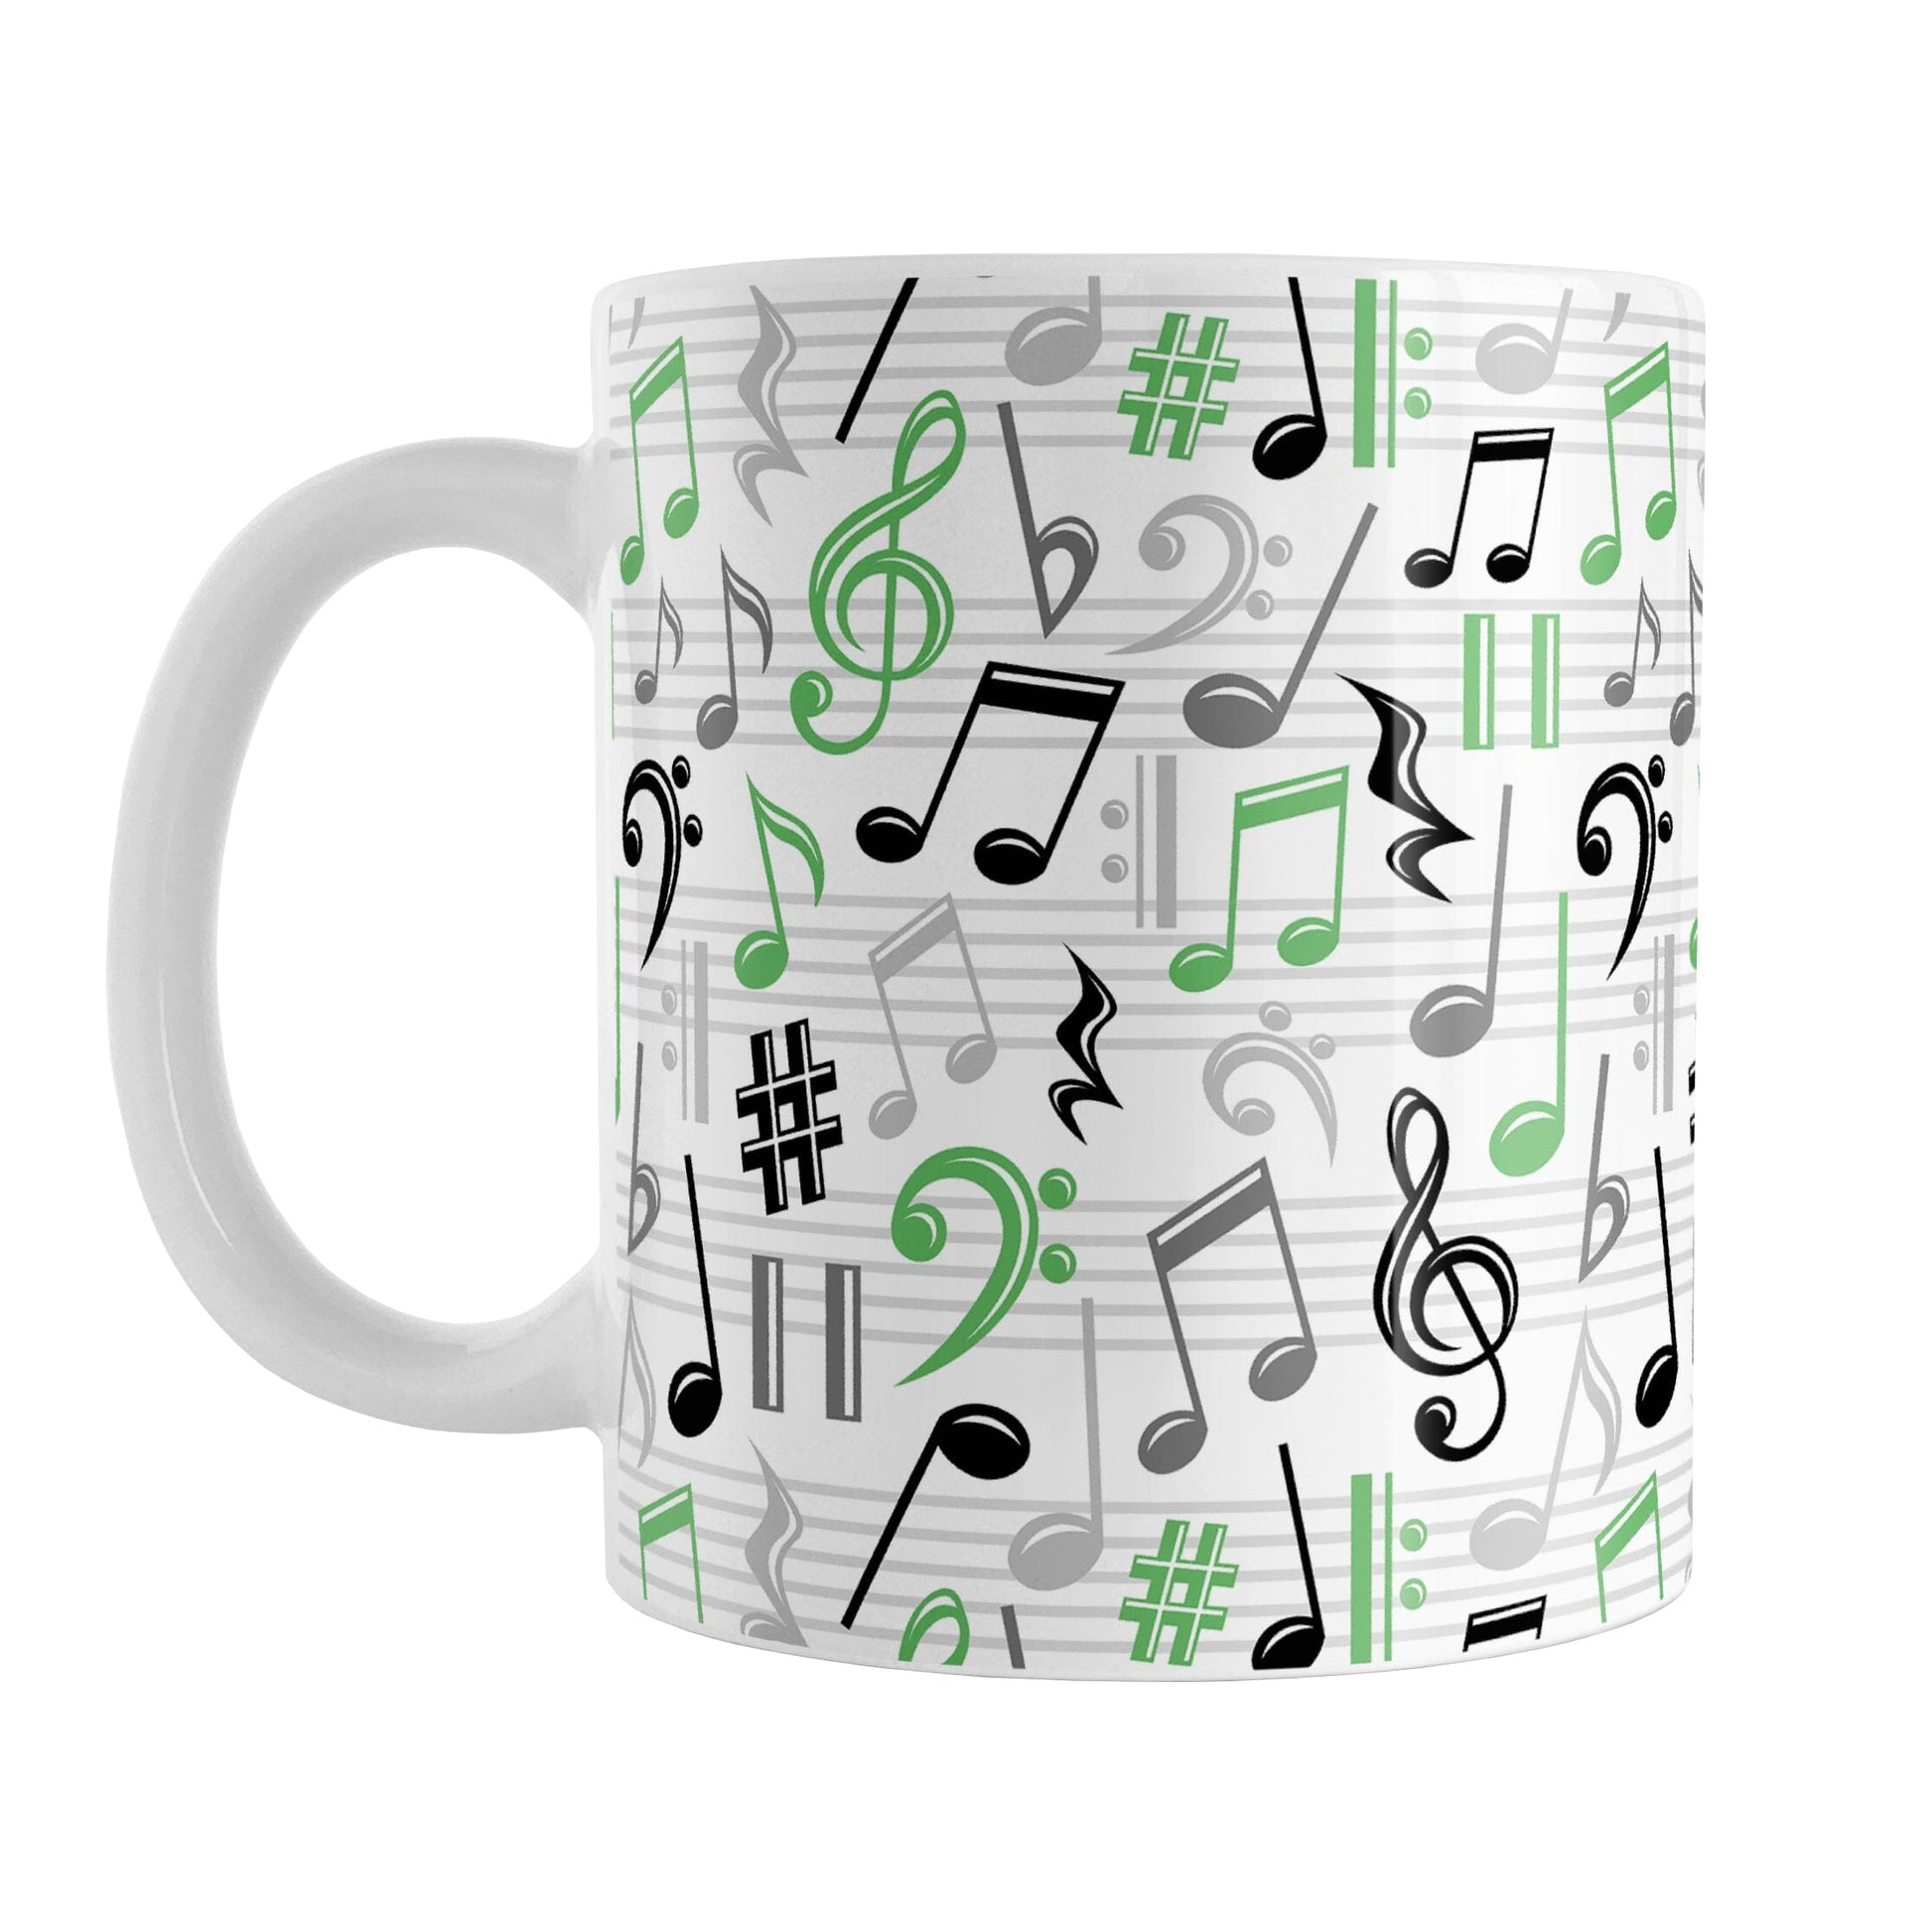 Green Music Notes Pattern Mug (11oz) at Amy's Coffee Mugs. A ceramic coffee mug designed with music notes and symbols in green, black, and gray in a pattern that wraps around the mug to the handle.